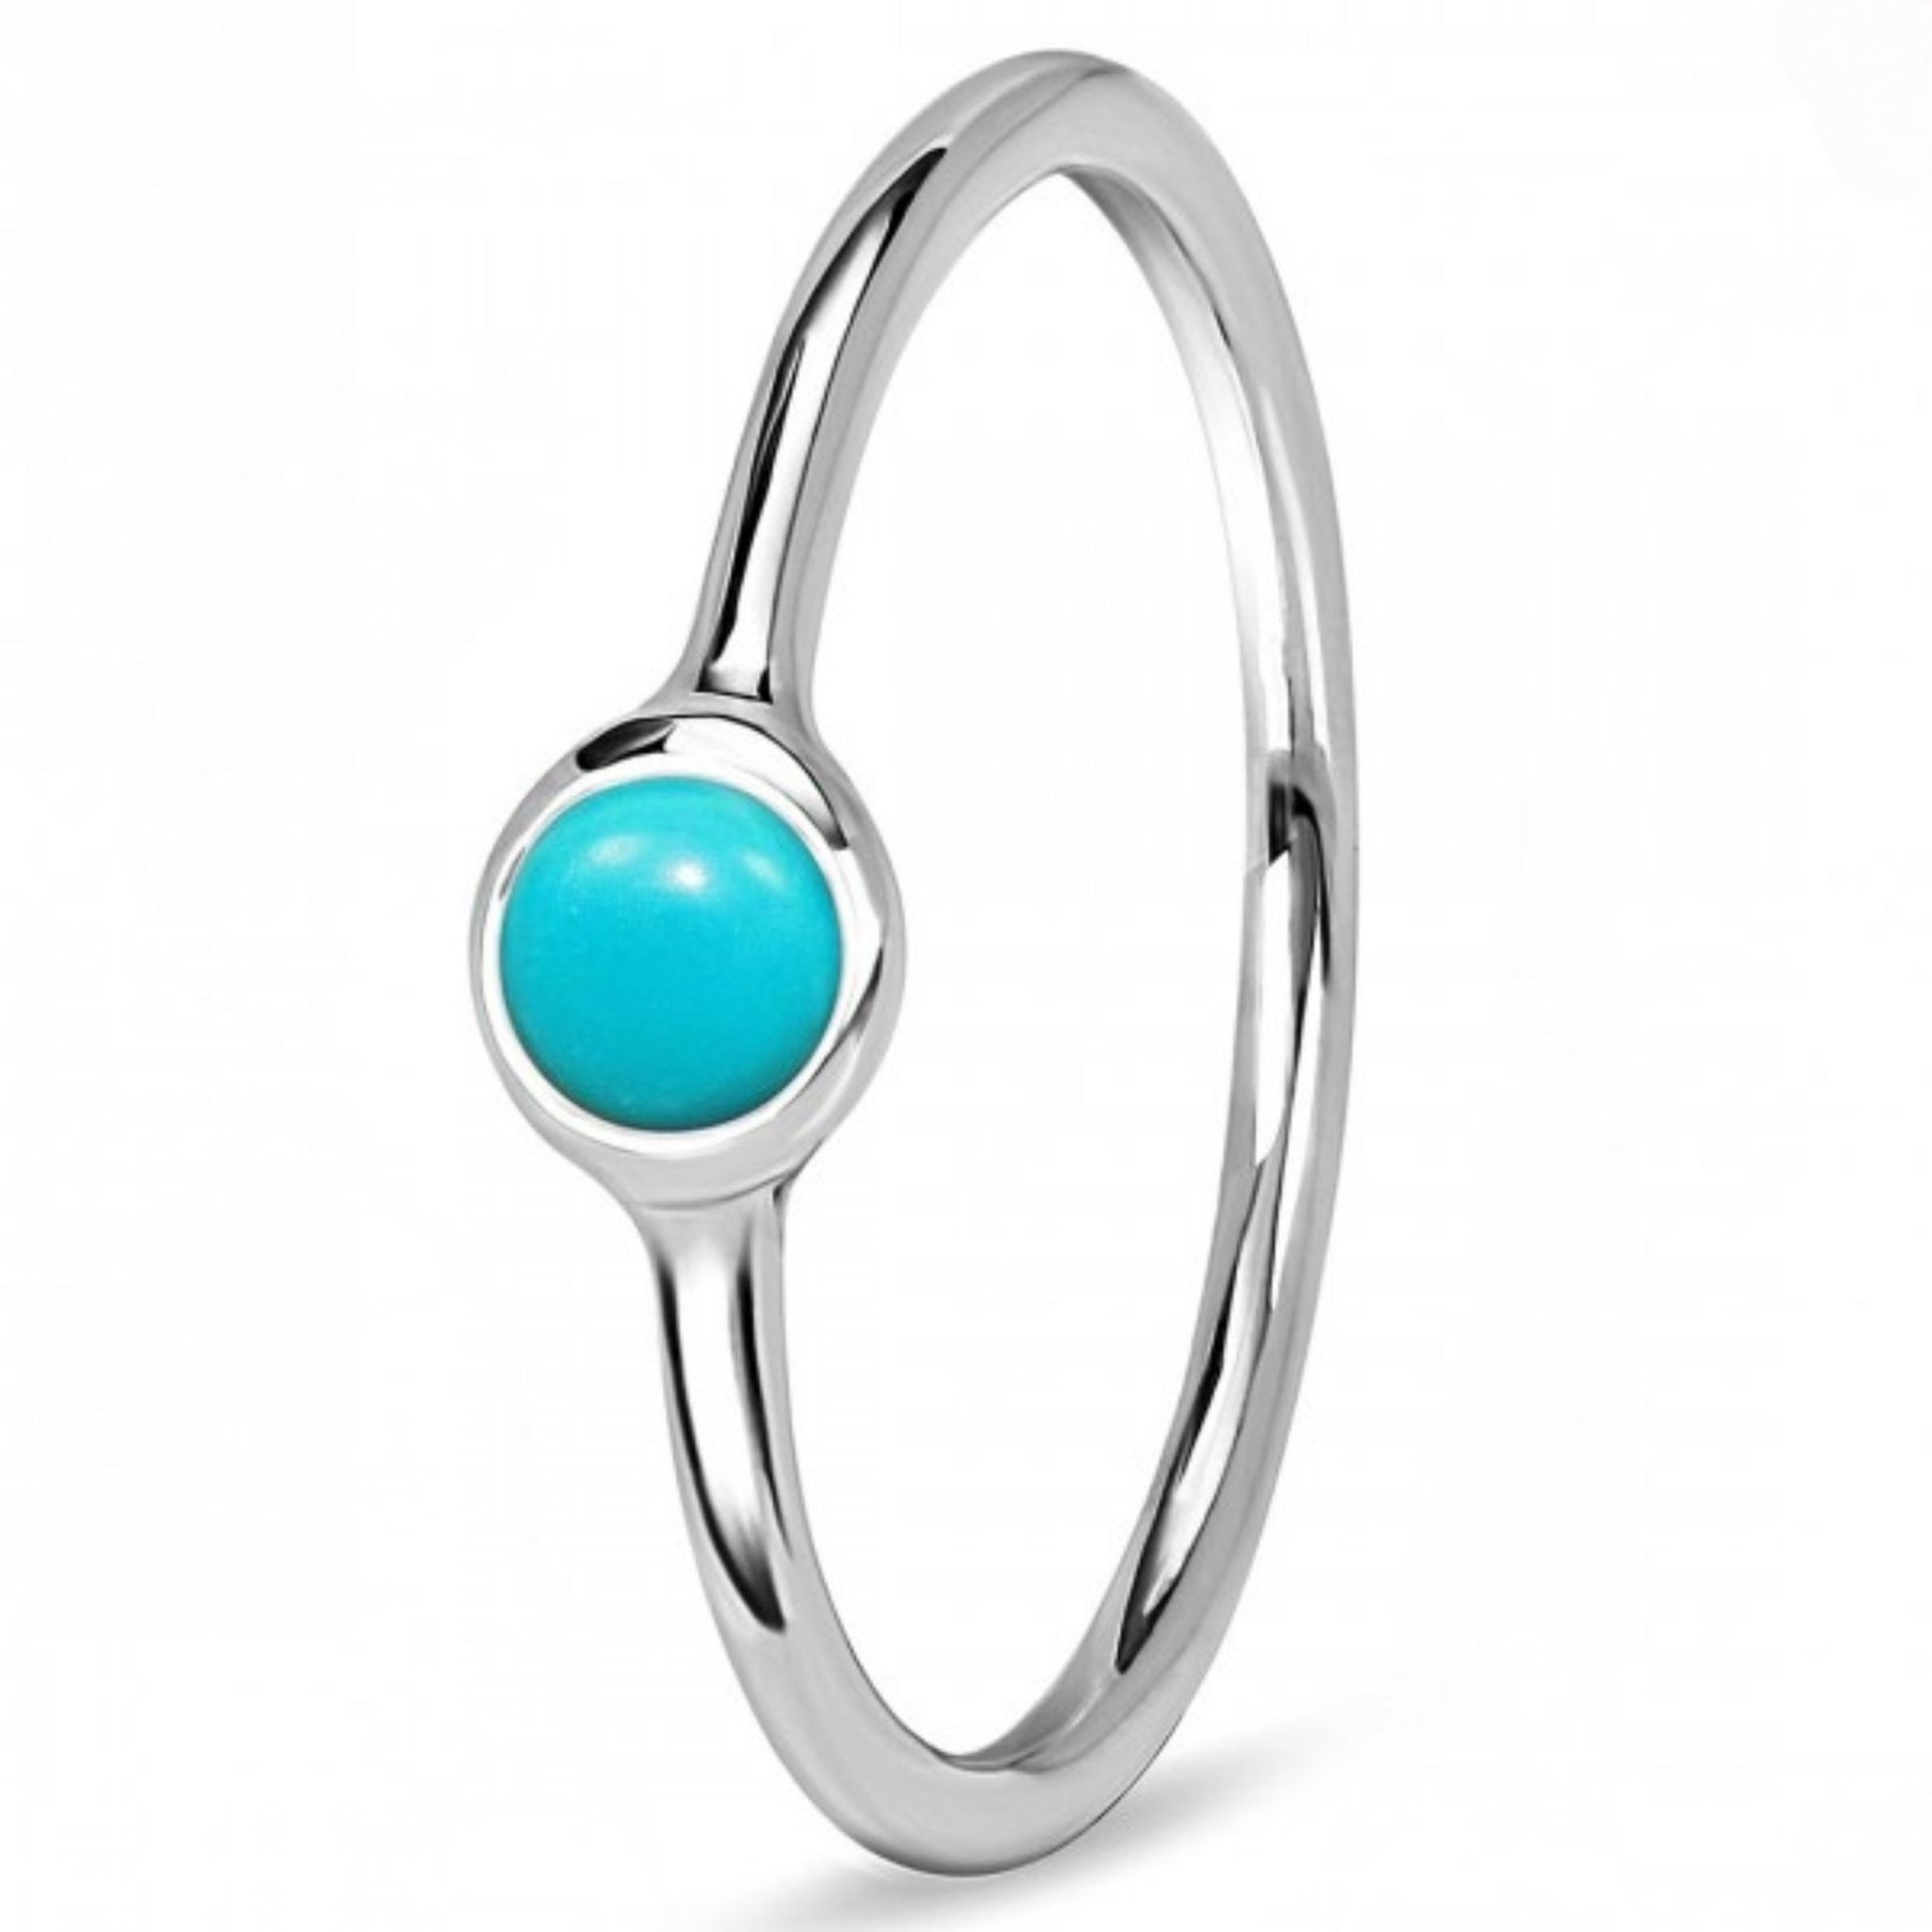 Turquoise Ring - Conscious Crystals New Zealand Crystal and Spiritual Shop